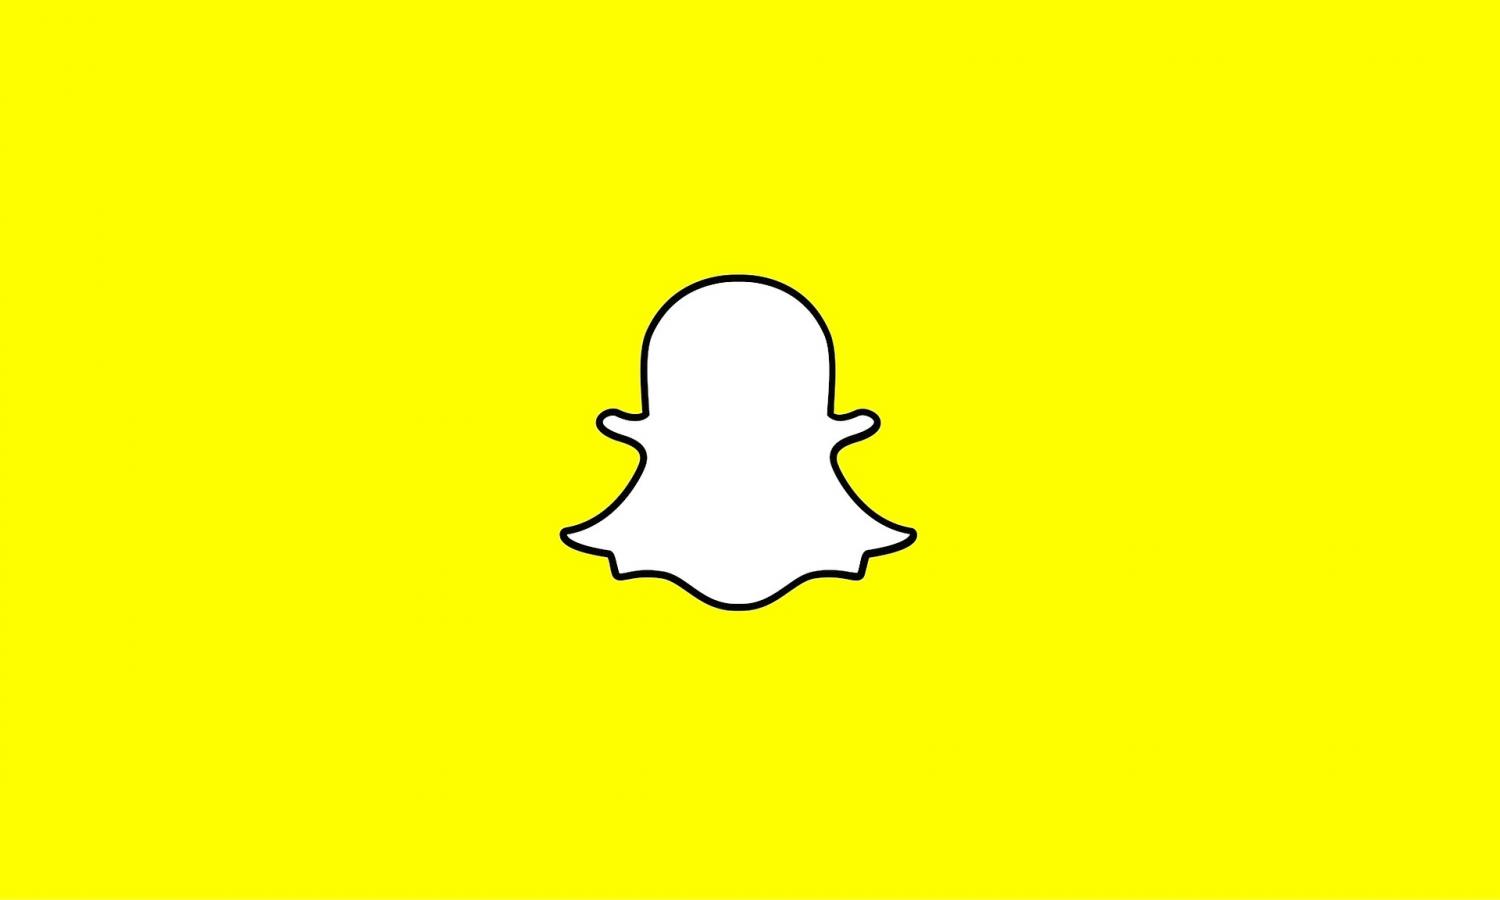 How to Add a Links to Snapchat Stories and Chat (Snaps)